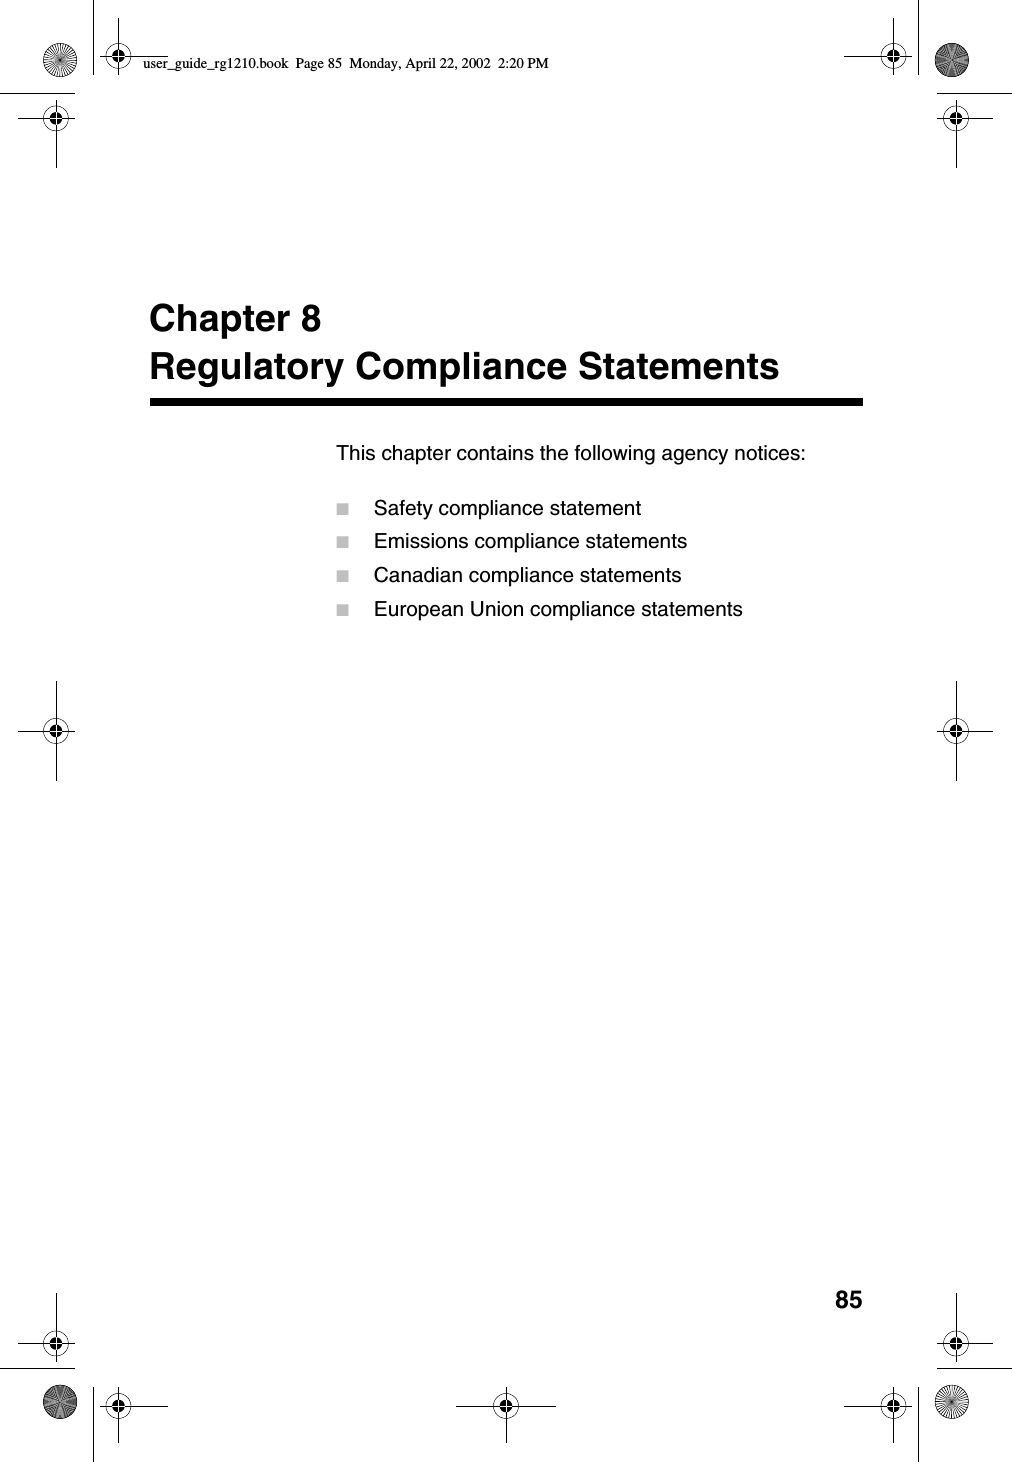 85Chapter 8Regulatory Compliance StatementsThis chapter contains the following agency notices:■Safety compliance statement■Emissions compliance statements■Canadian compliance statements■European Union compliance statementsuser_guide_rg1210.book Page 85 Monday, April 22, 2002 2:20 PM